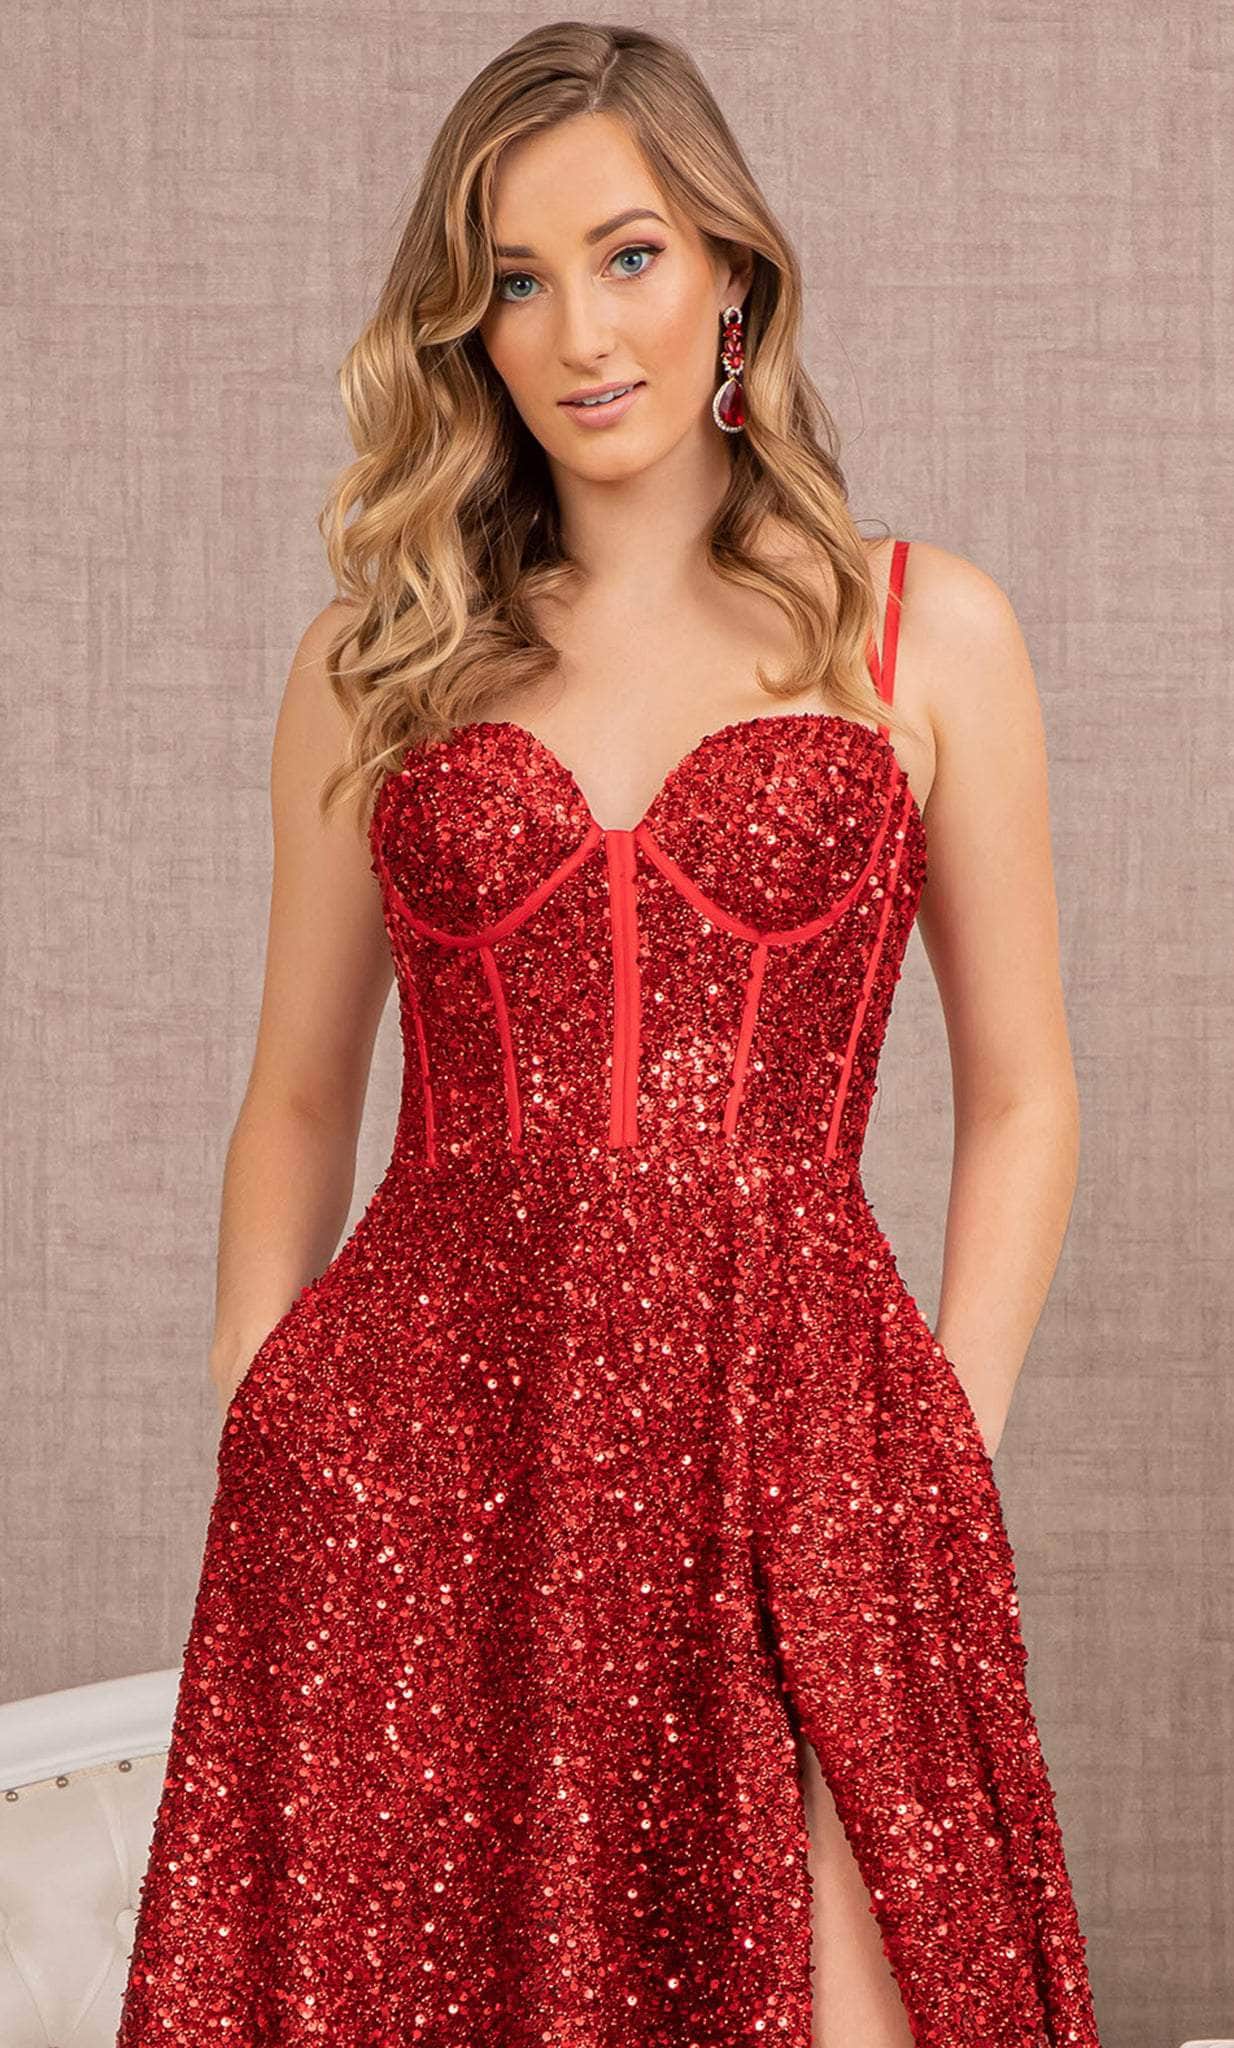 Sweetheart Neckline Corset Fully Sequined Prom Gown GL3132 – Sparkly Gowns